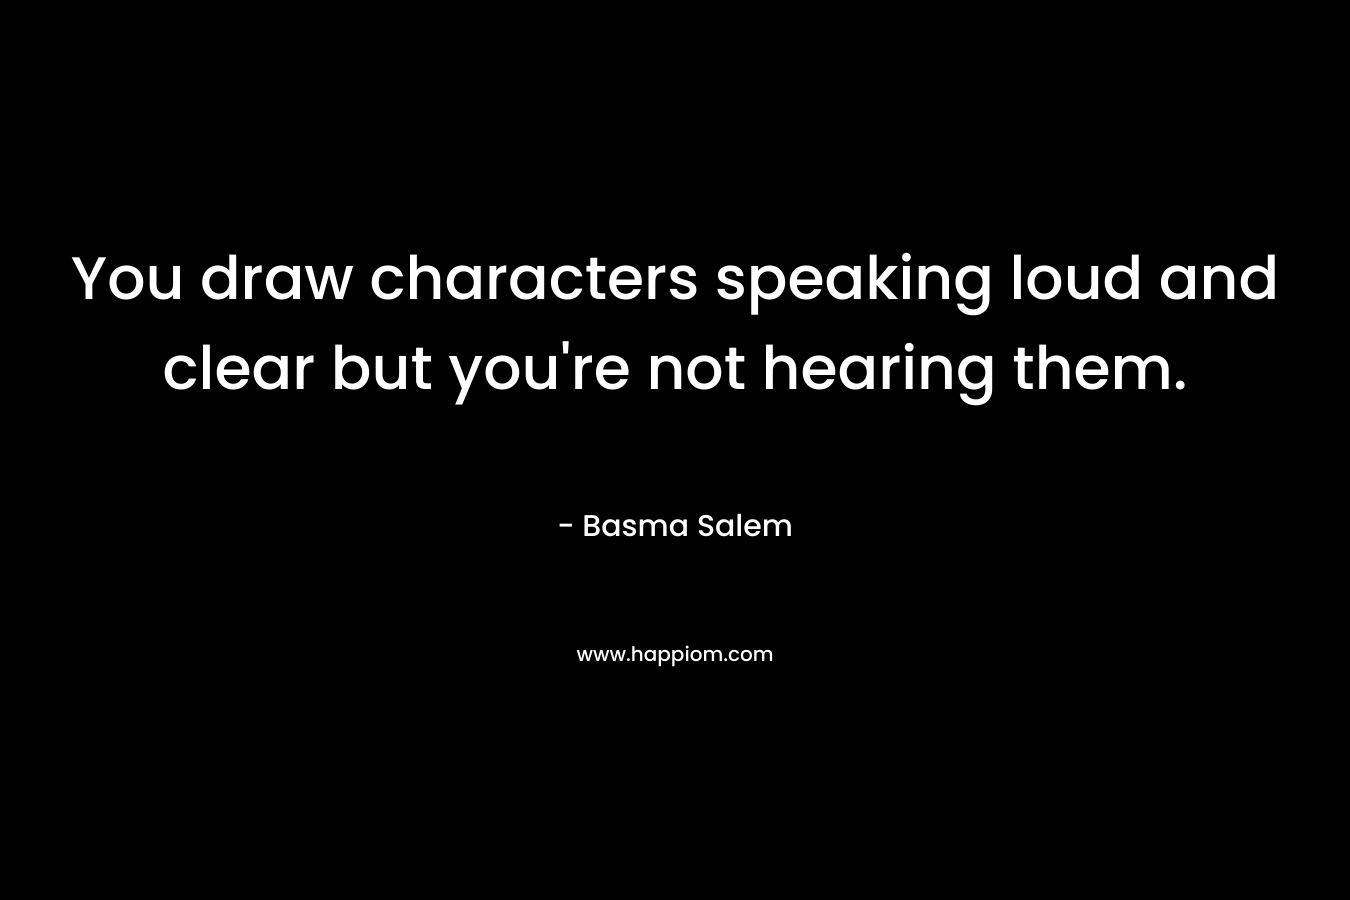 You draw characters speaking loud and clear but you’re not hearing them. – Basma Salem